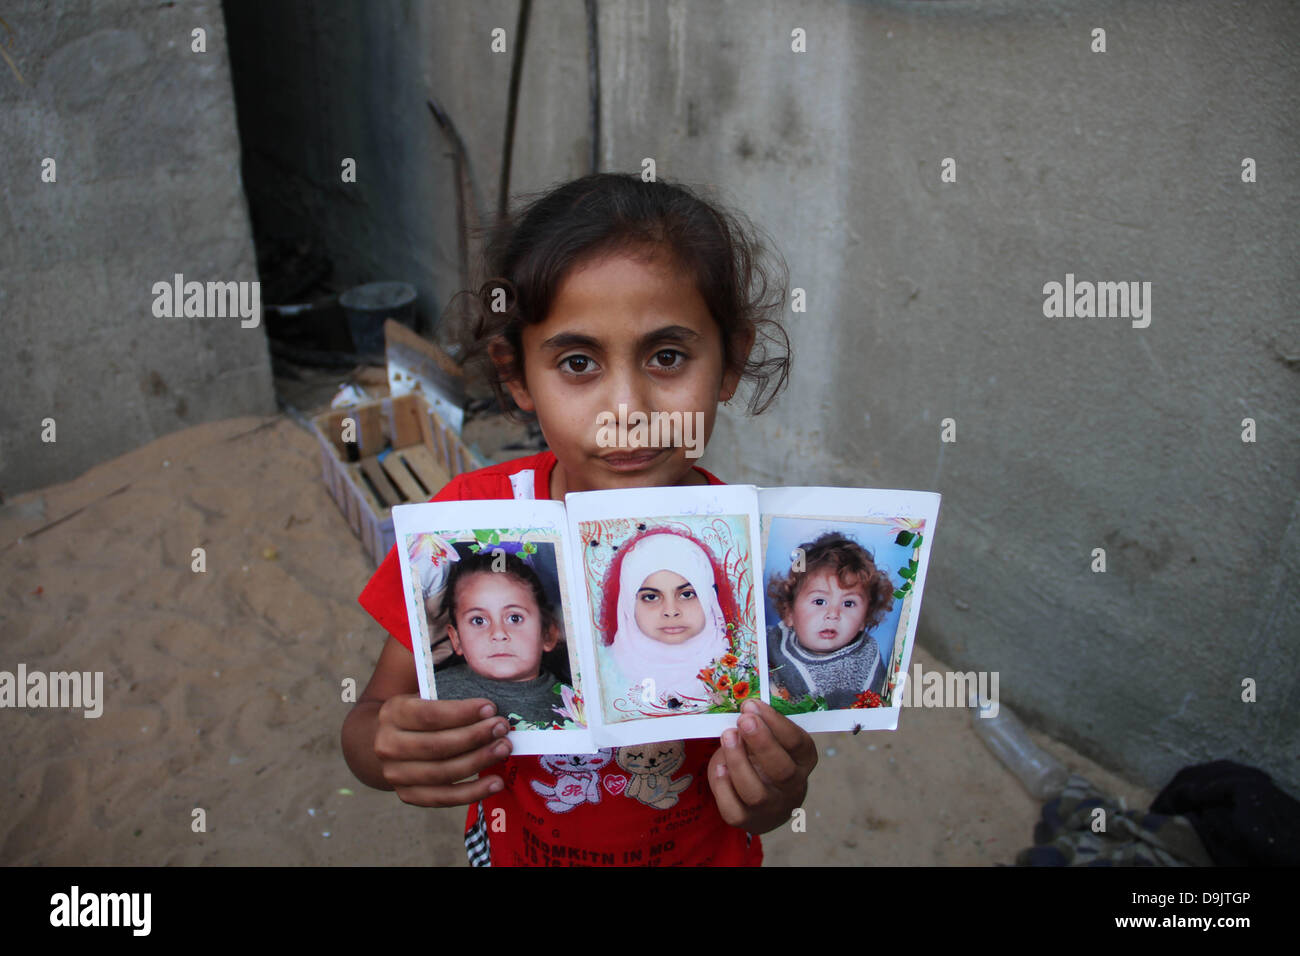 Child suffering from malnutrition and poverty, displays pictures of the siblings of children who were killed by Israel fired a missile at their home in the Gaza war of 2012. Stock Photo